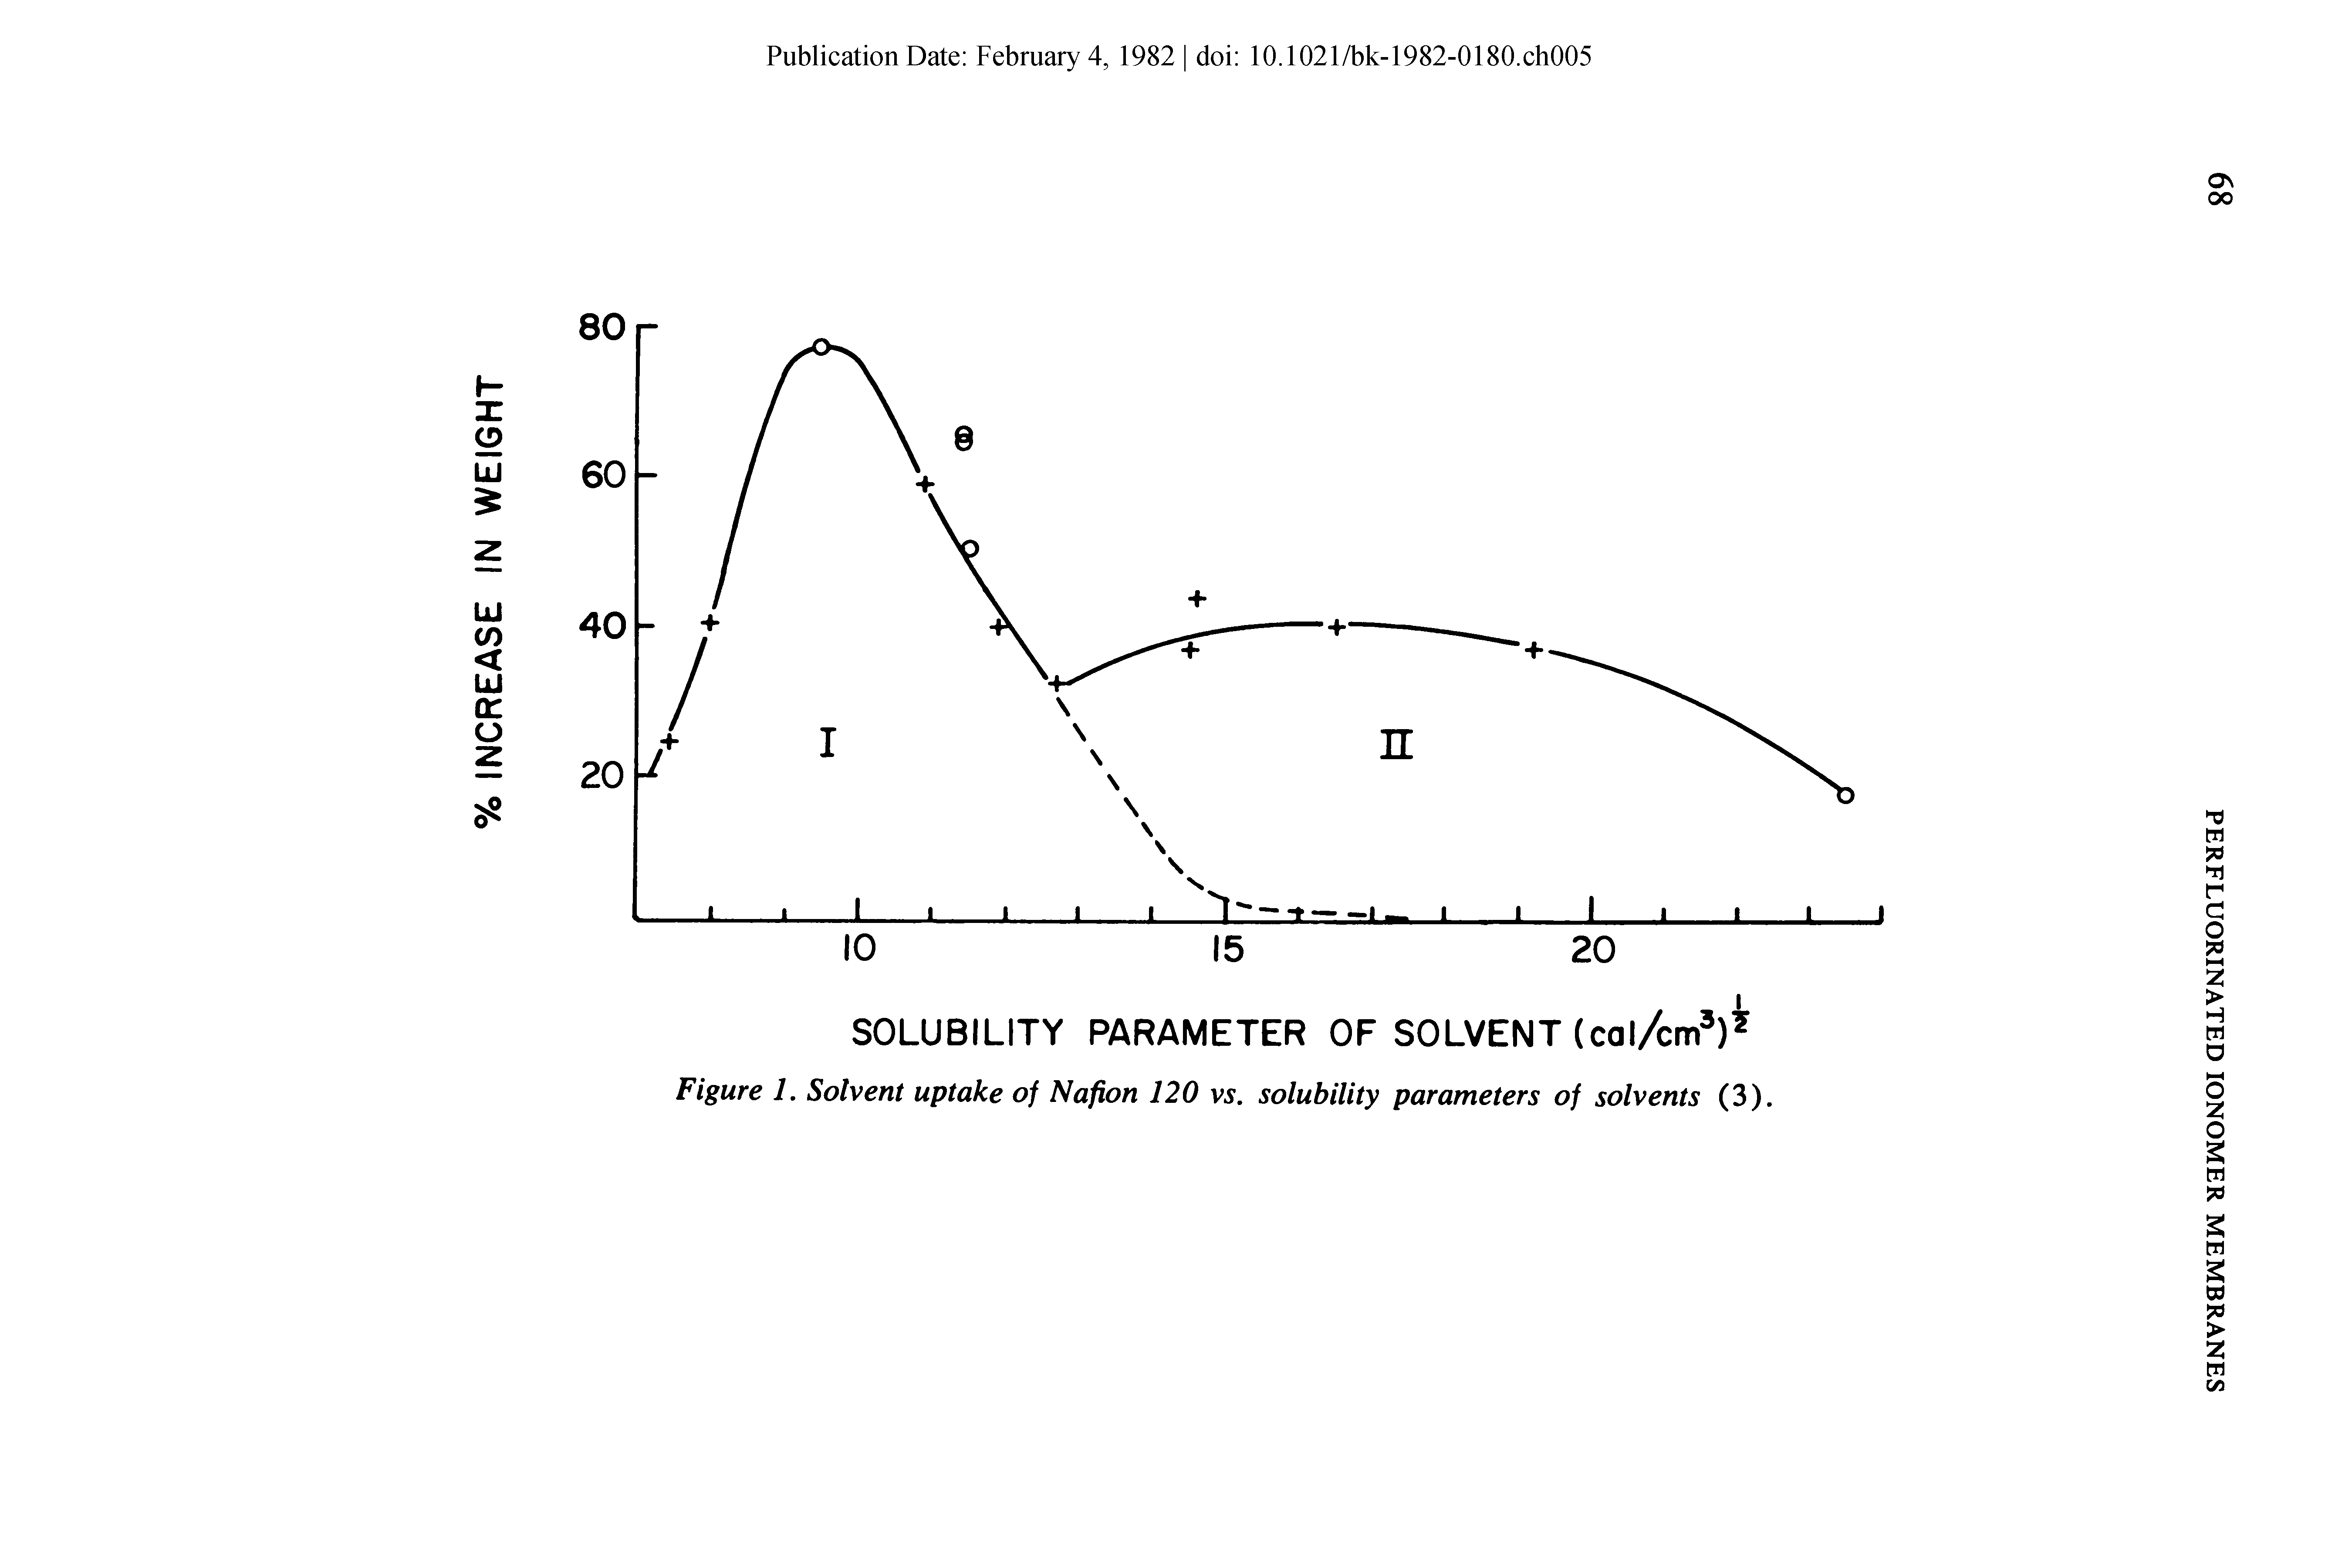 Figure 1. Solvent uptake of Nafion 120 vs. solubility parameters of solvents (3).